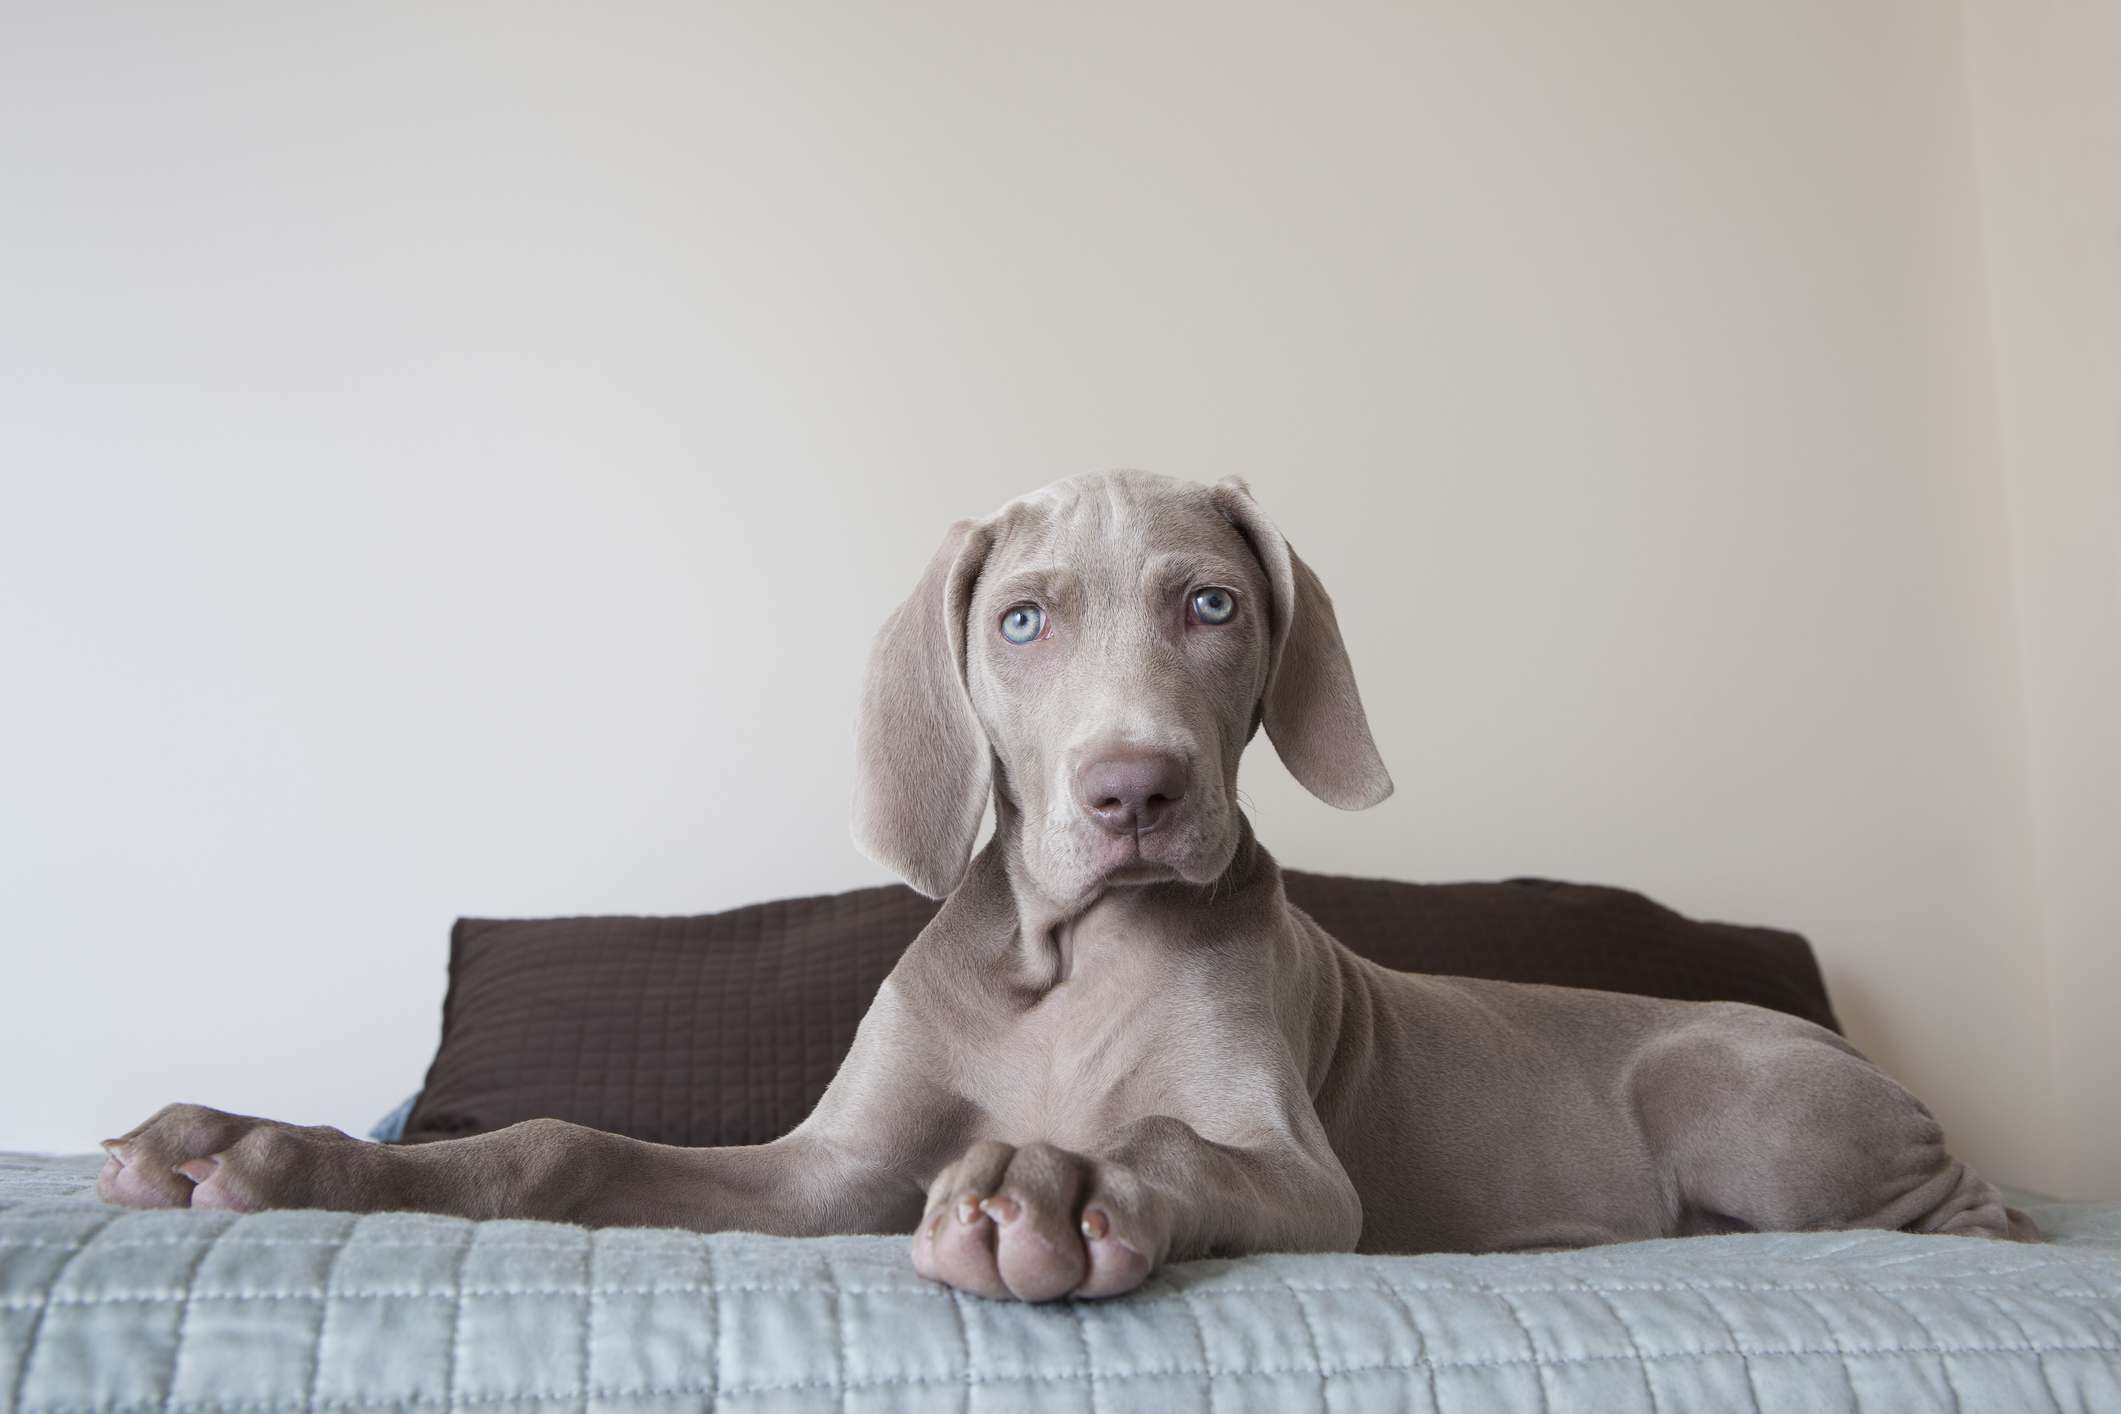 Gray Weimaraner with blue eyes on bed looking at camera.